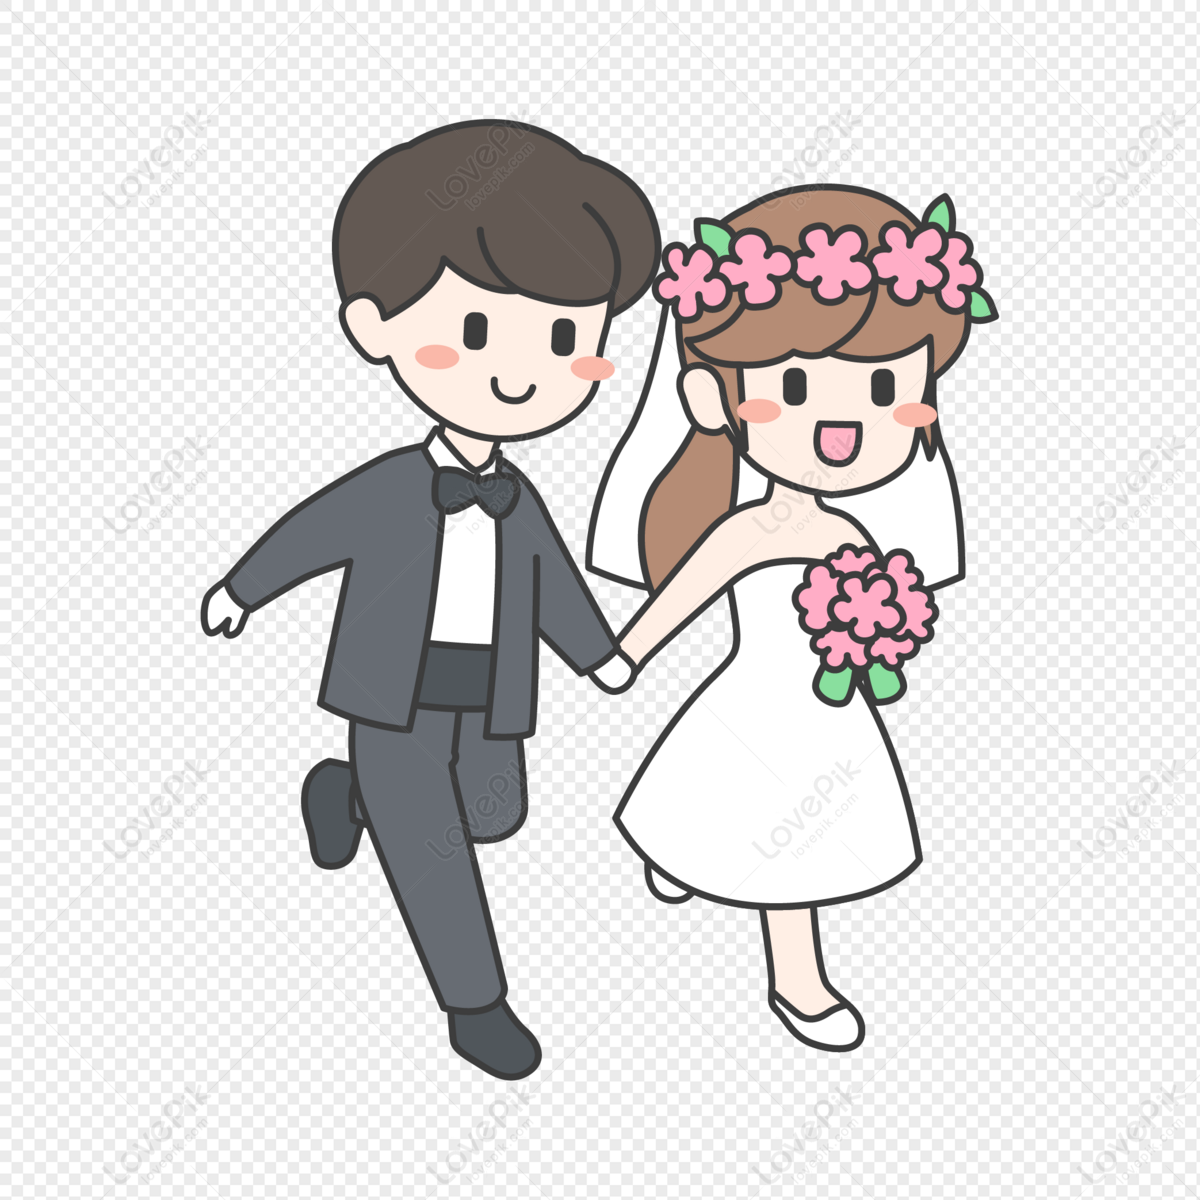 Couple PNG Images With Transparent Background | Free Download On Lovepik